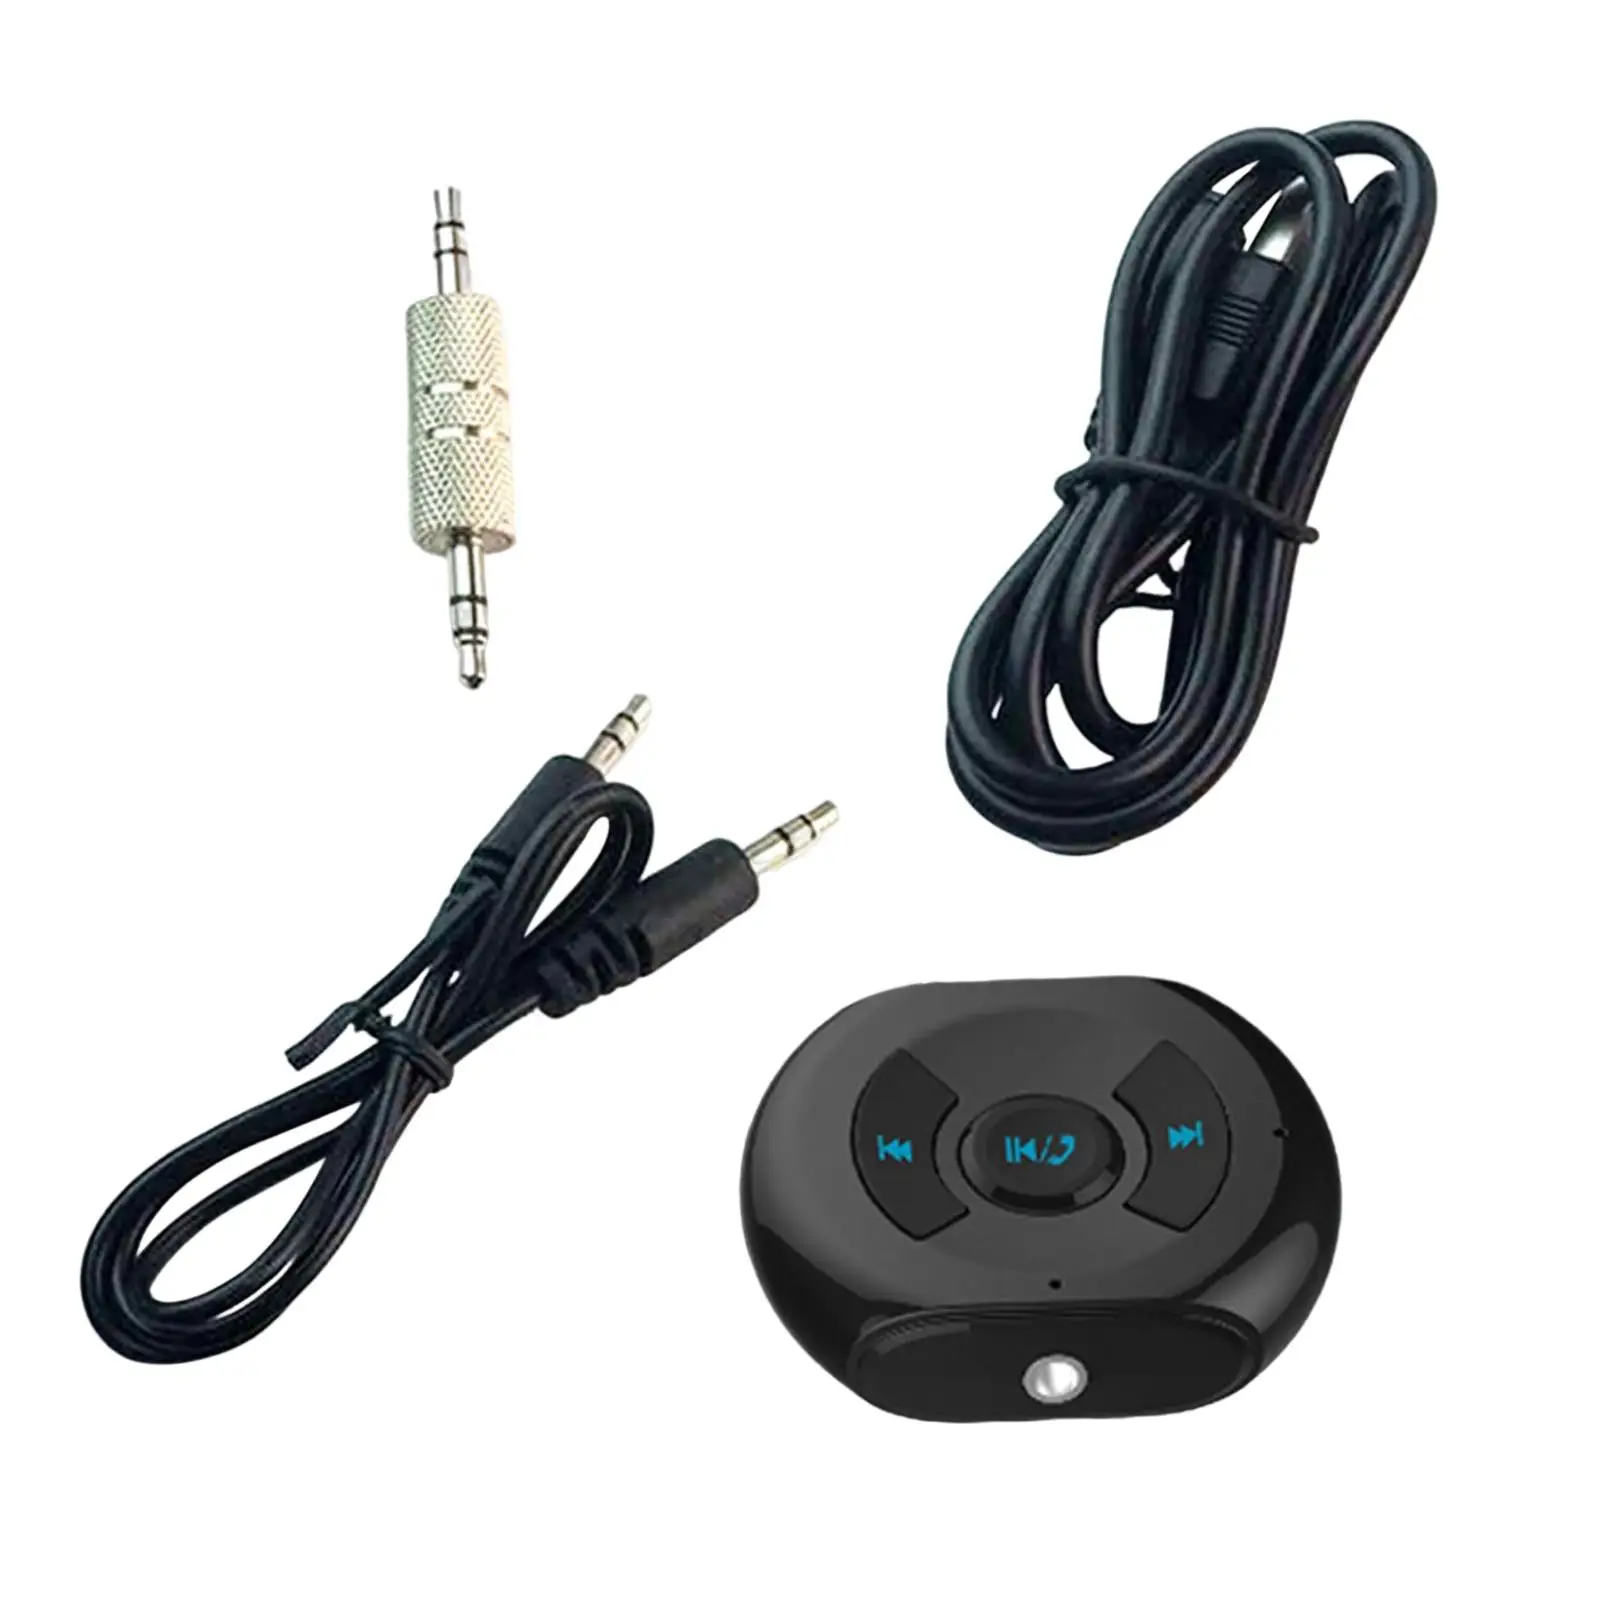 Car Bluetooth Adapter AUX 3.5mm Audio Receivers for Speaker Wired Headphones with Audio Cable Plug into 3.5mm AUX Port Portable